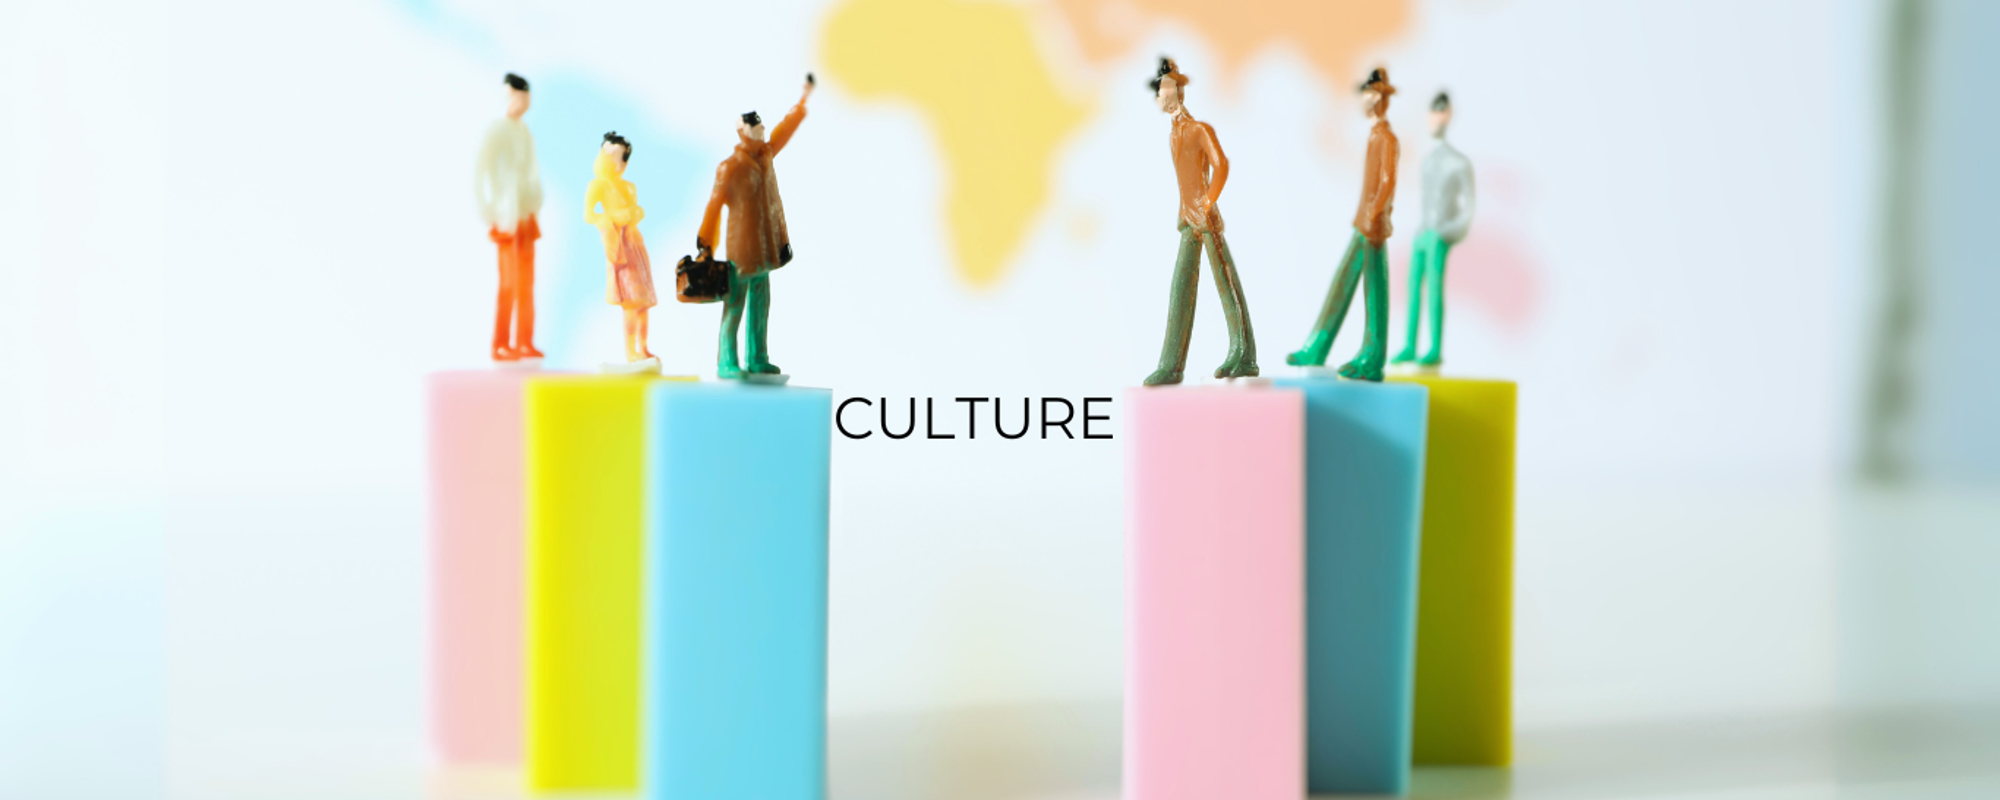 What is the role of organisational culture in business?